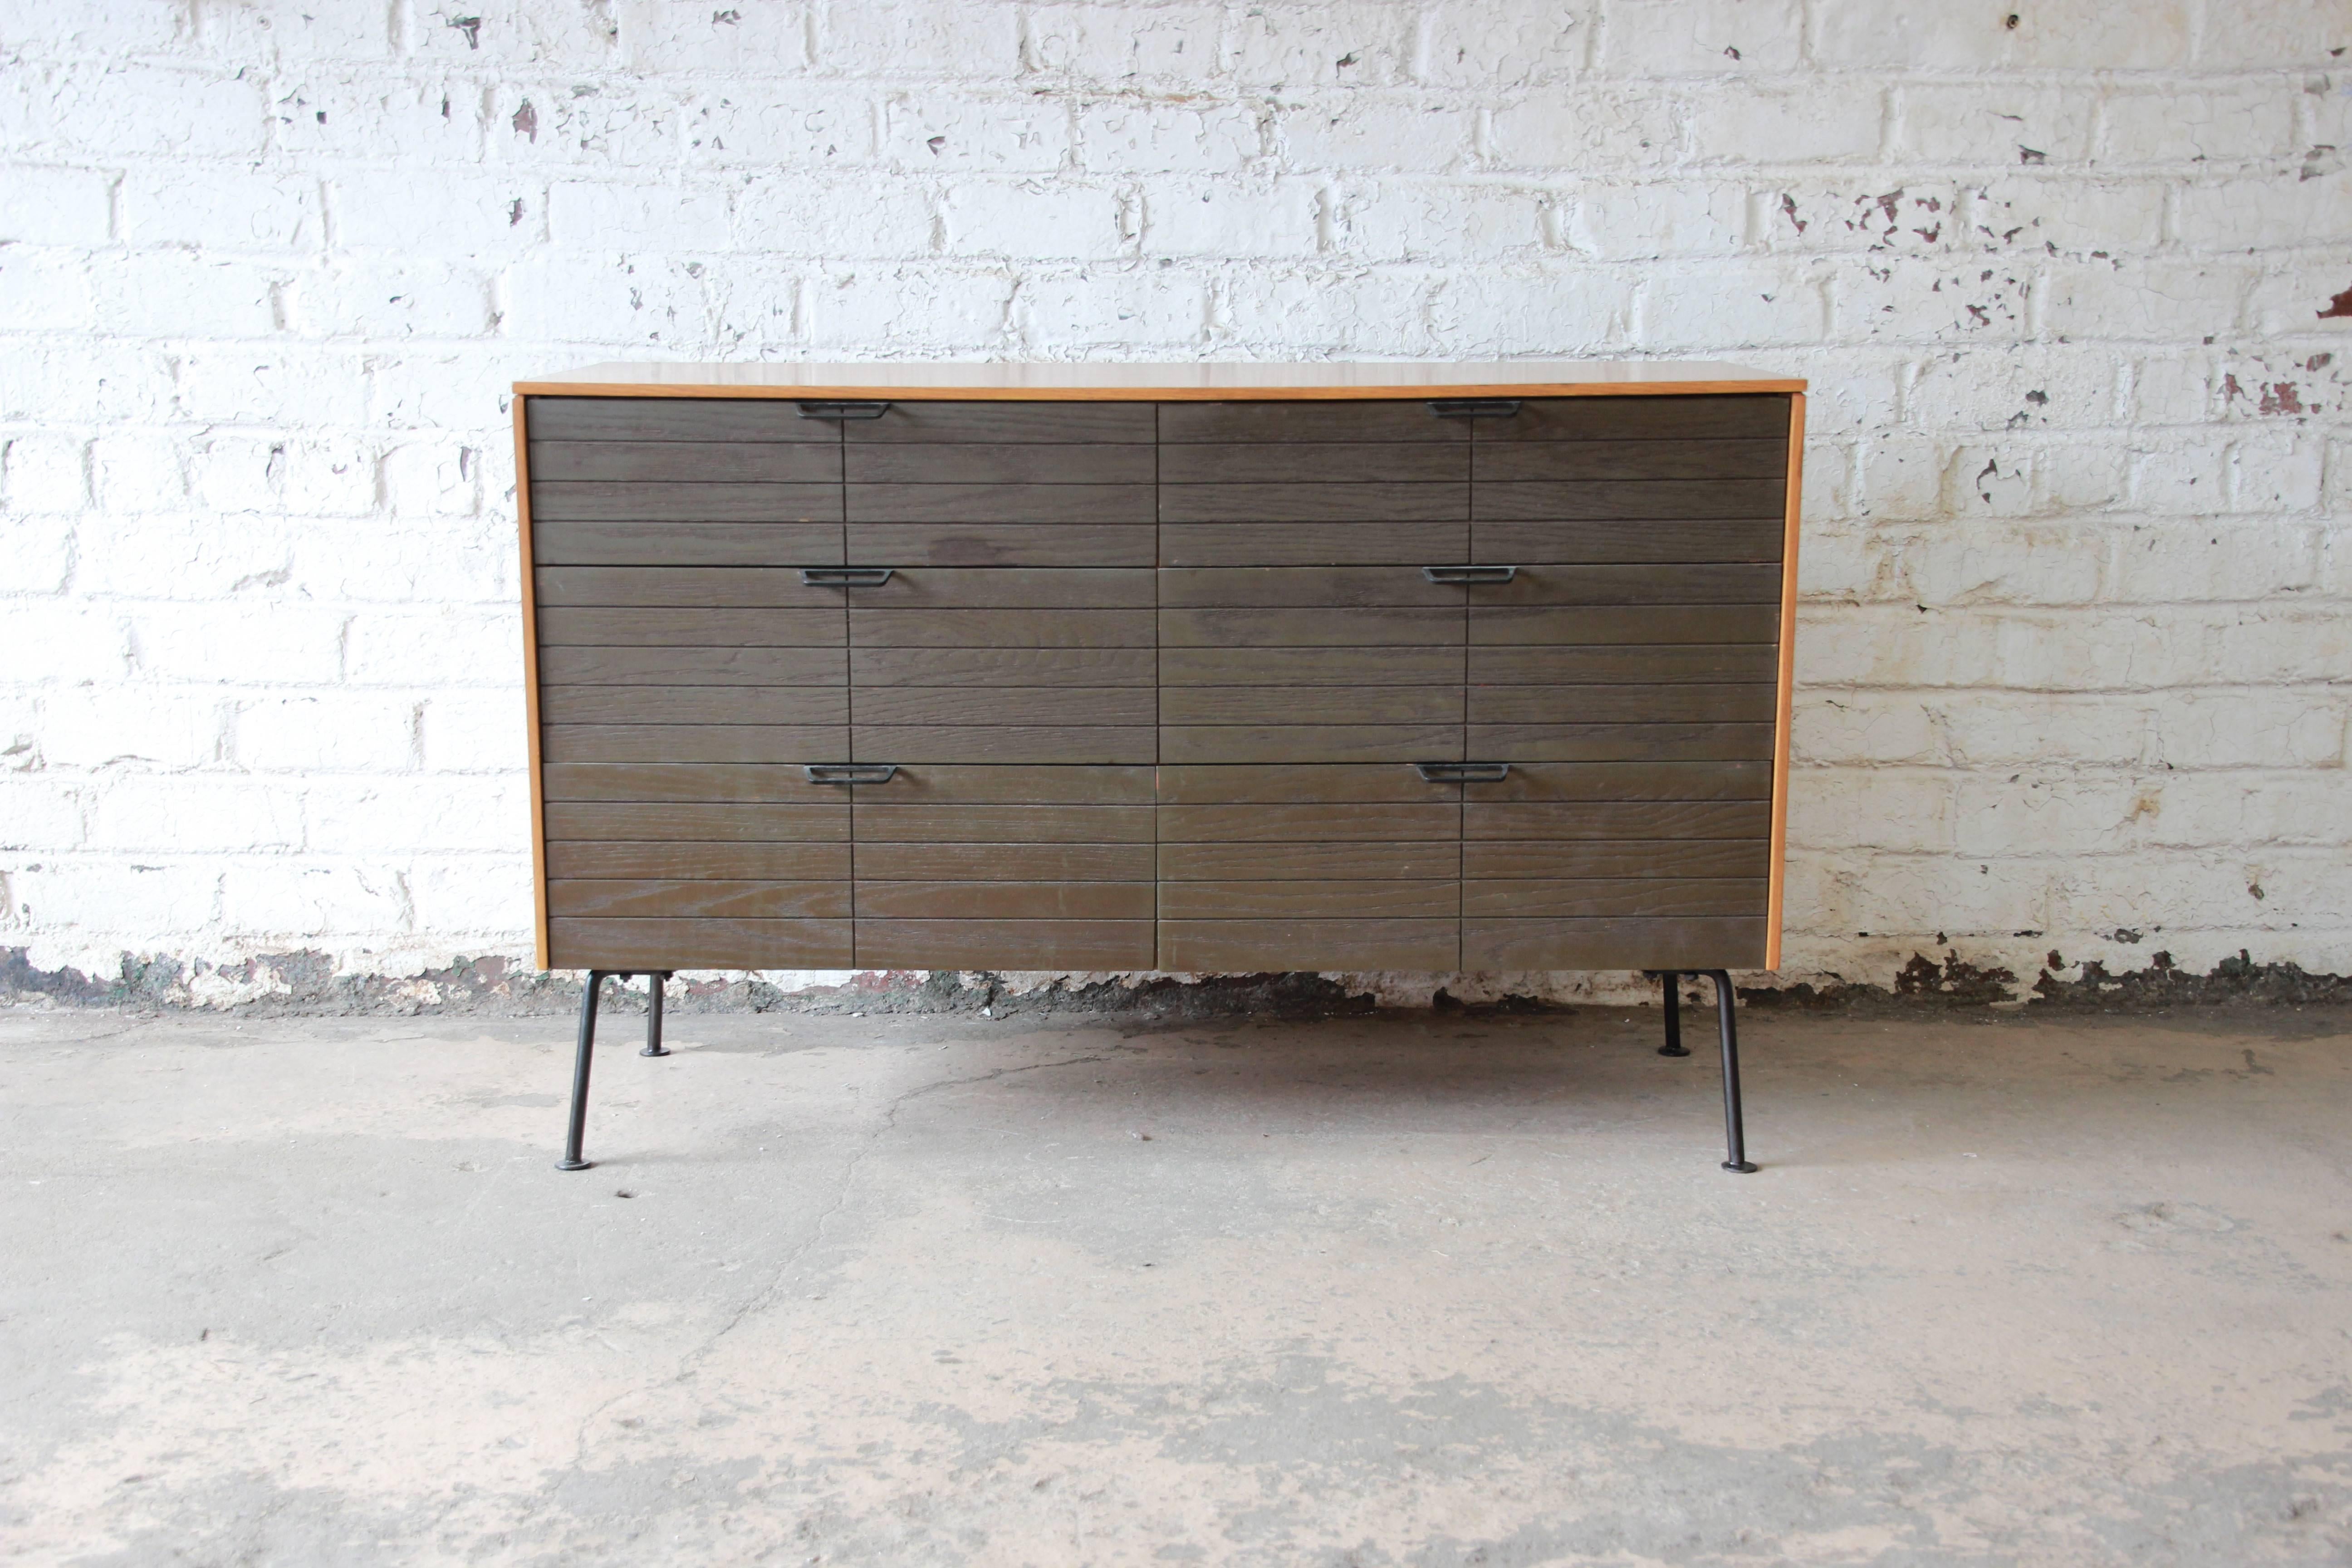 A rare and exceptional six-drawer Mid-Century Modern dresser designed by Raymond Loewy for Mengel Furniture Company. The dresser has a unique two-toned design. It offers ample room for storage with six deep dovetailed drawers. Metal pulls and legs